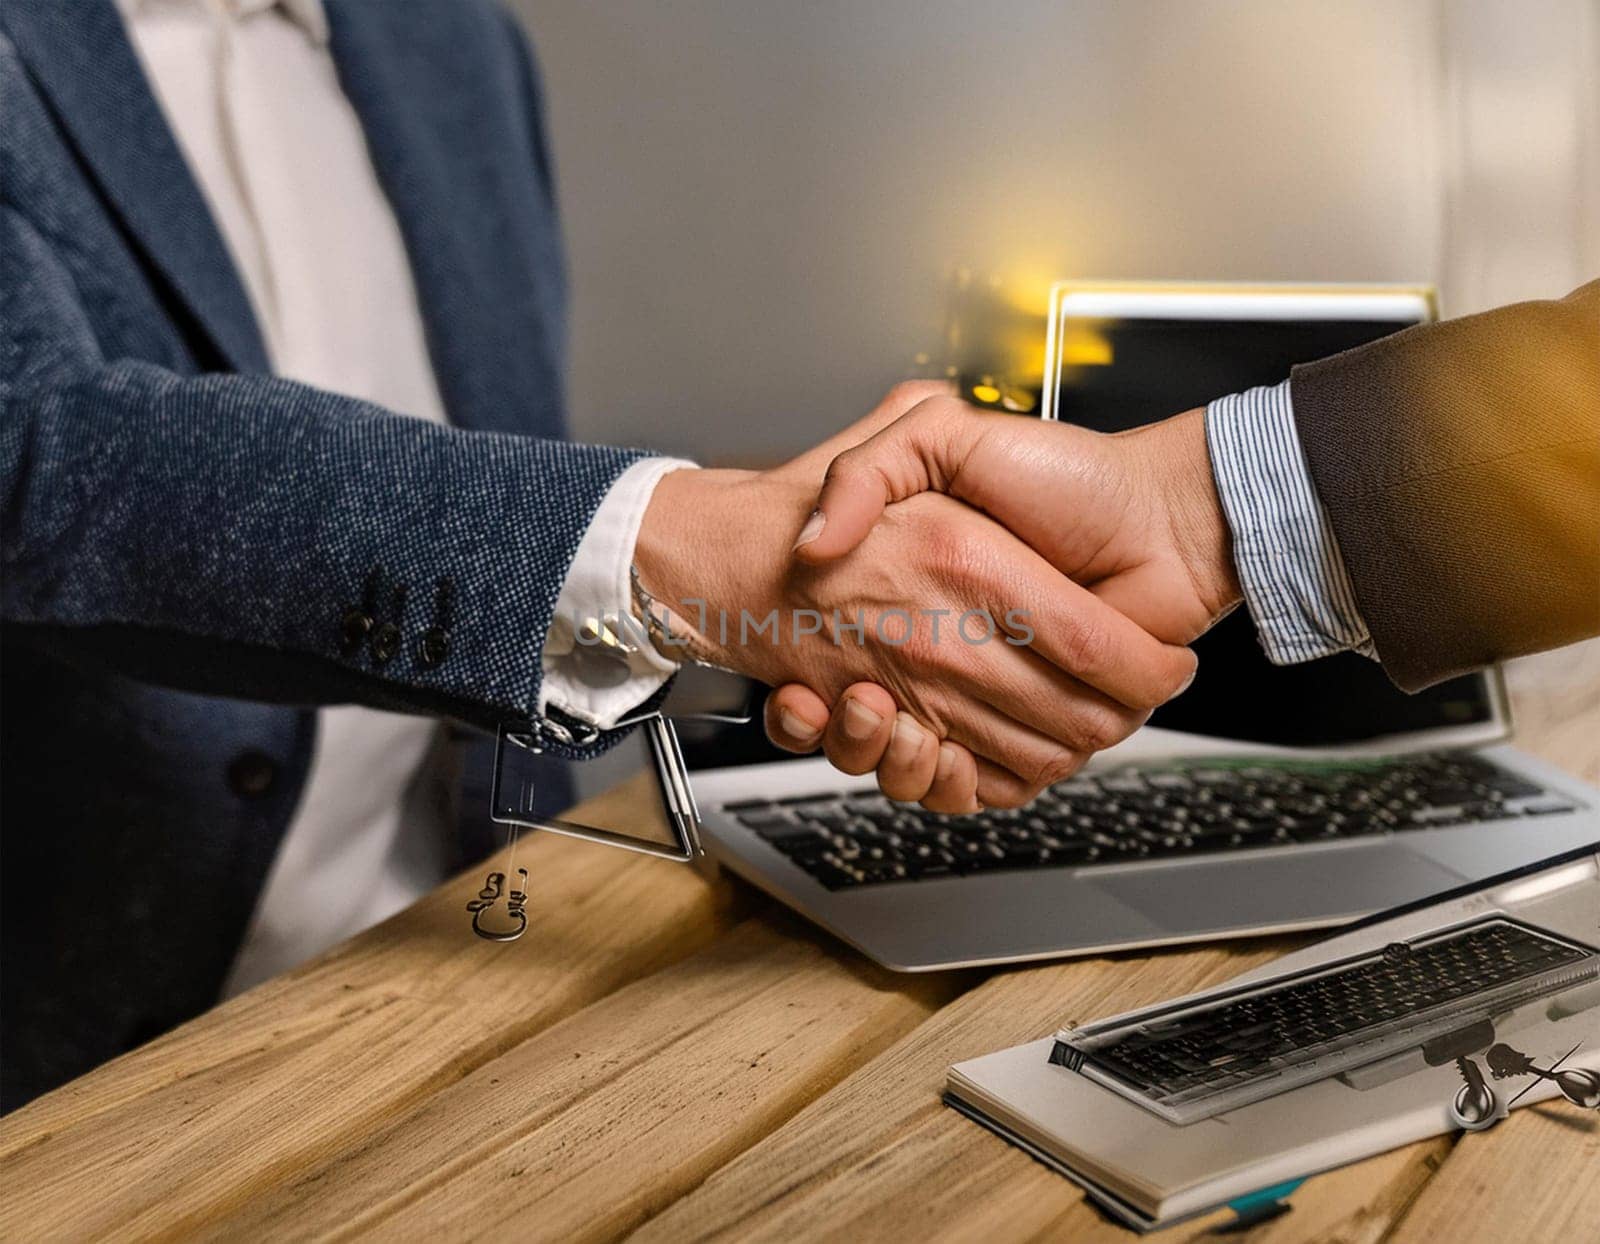 Handshake concept between a businessman and a person from the laptop screen.